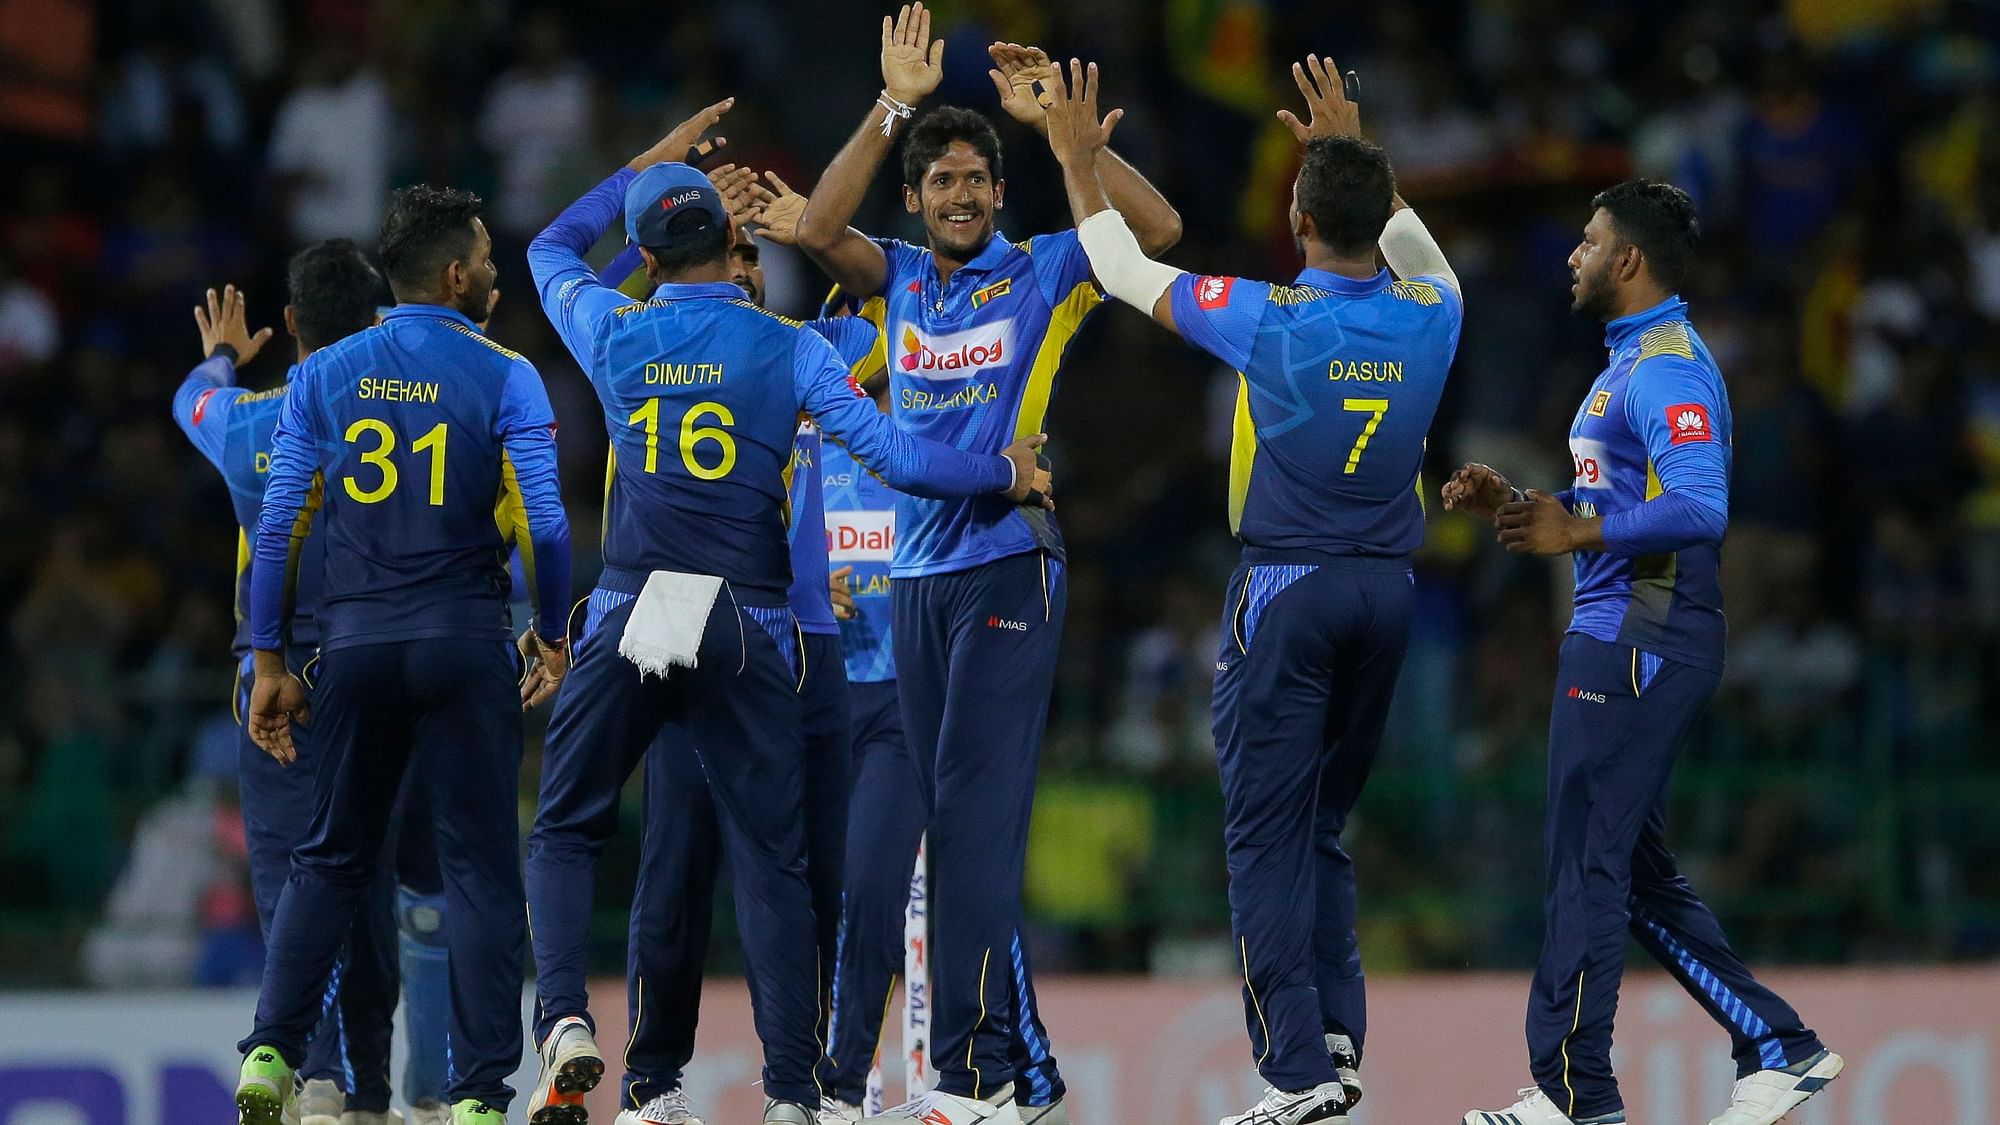 This was Sri Lanka’s first one-day international series sweep in more than three years.